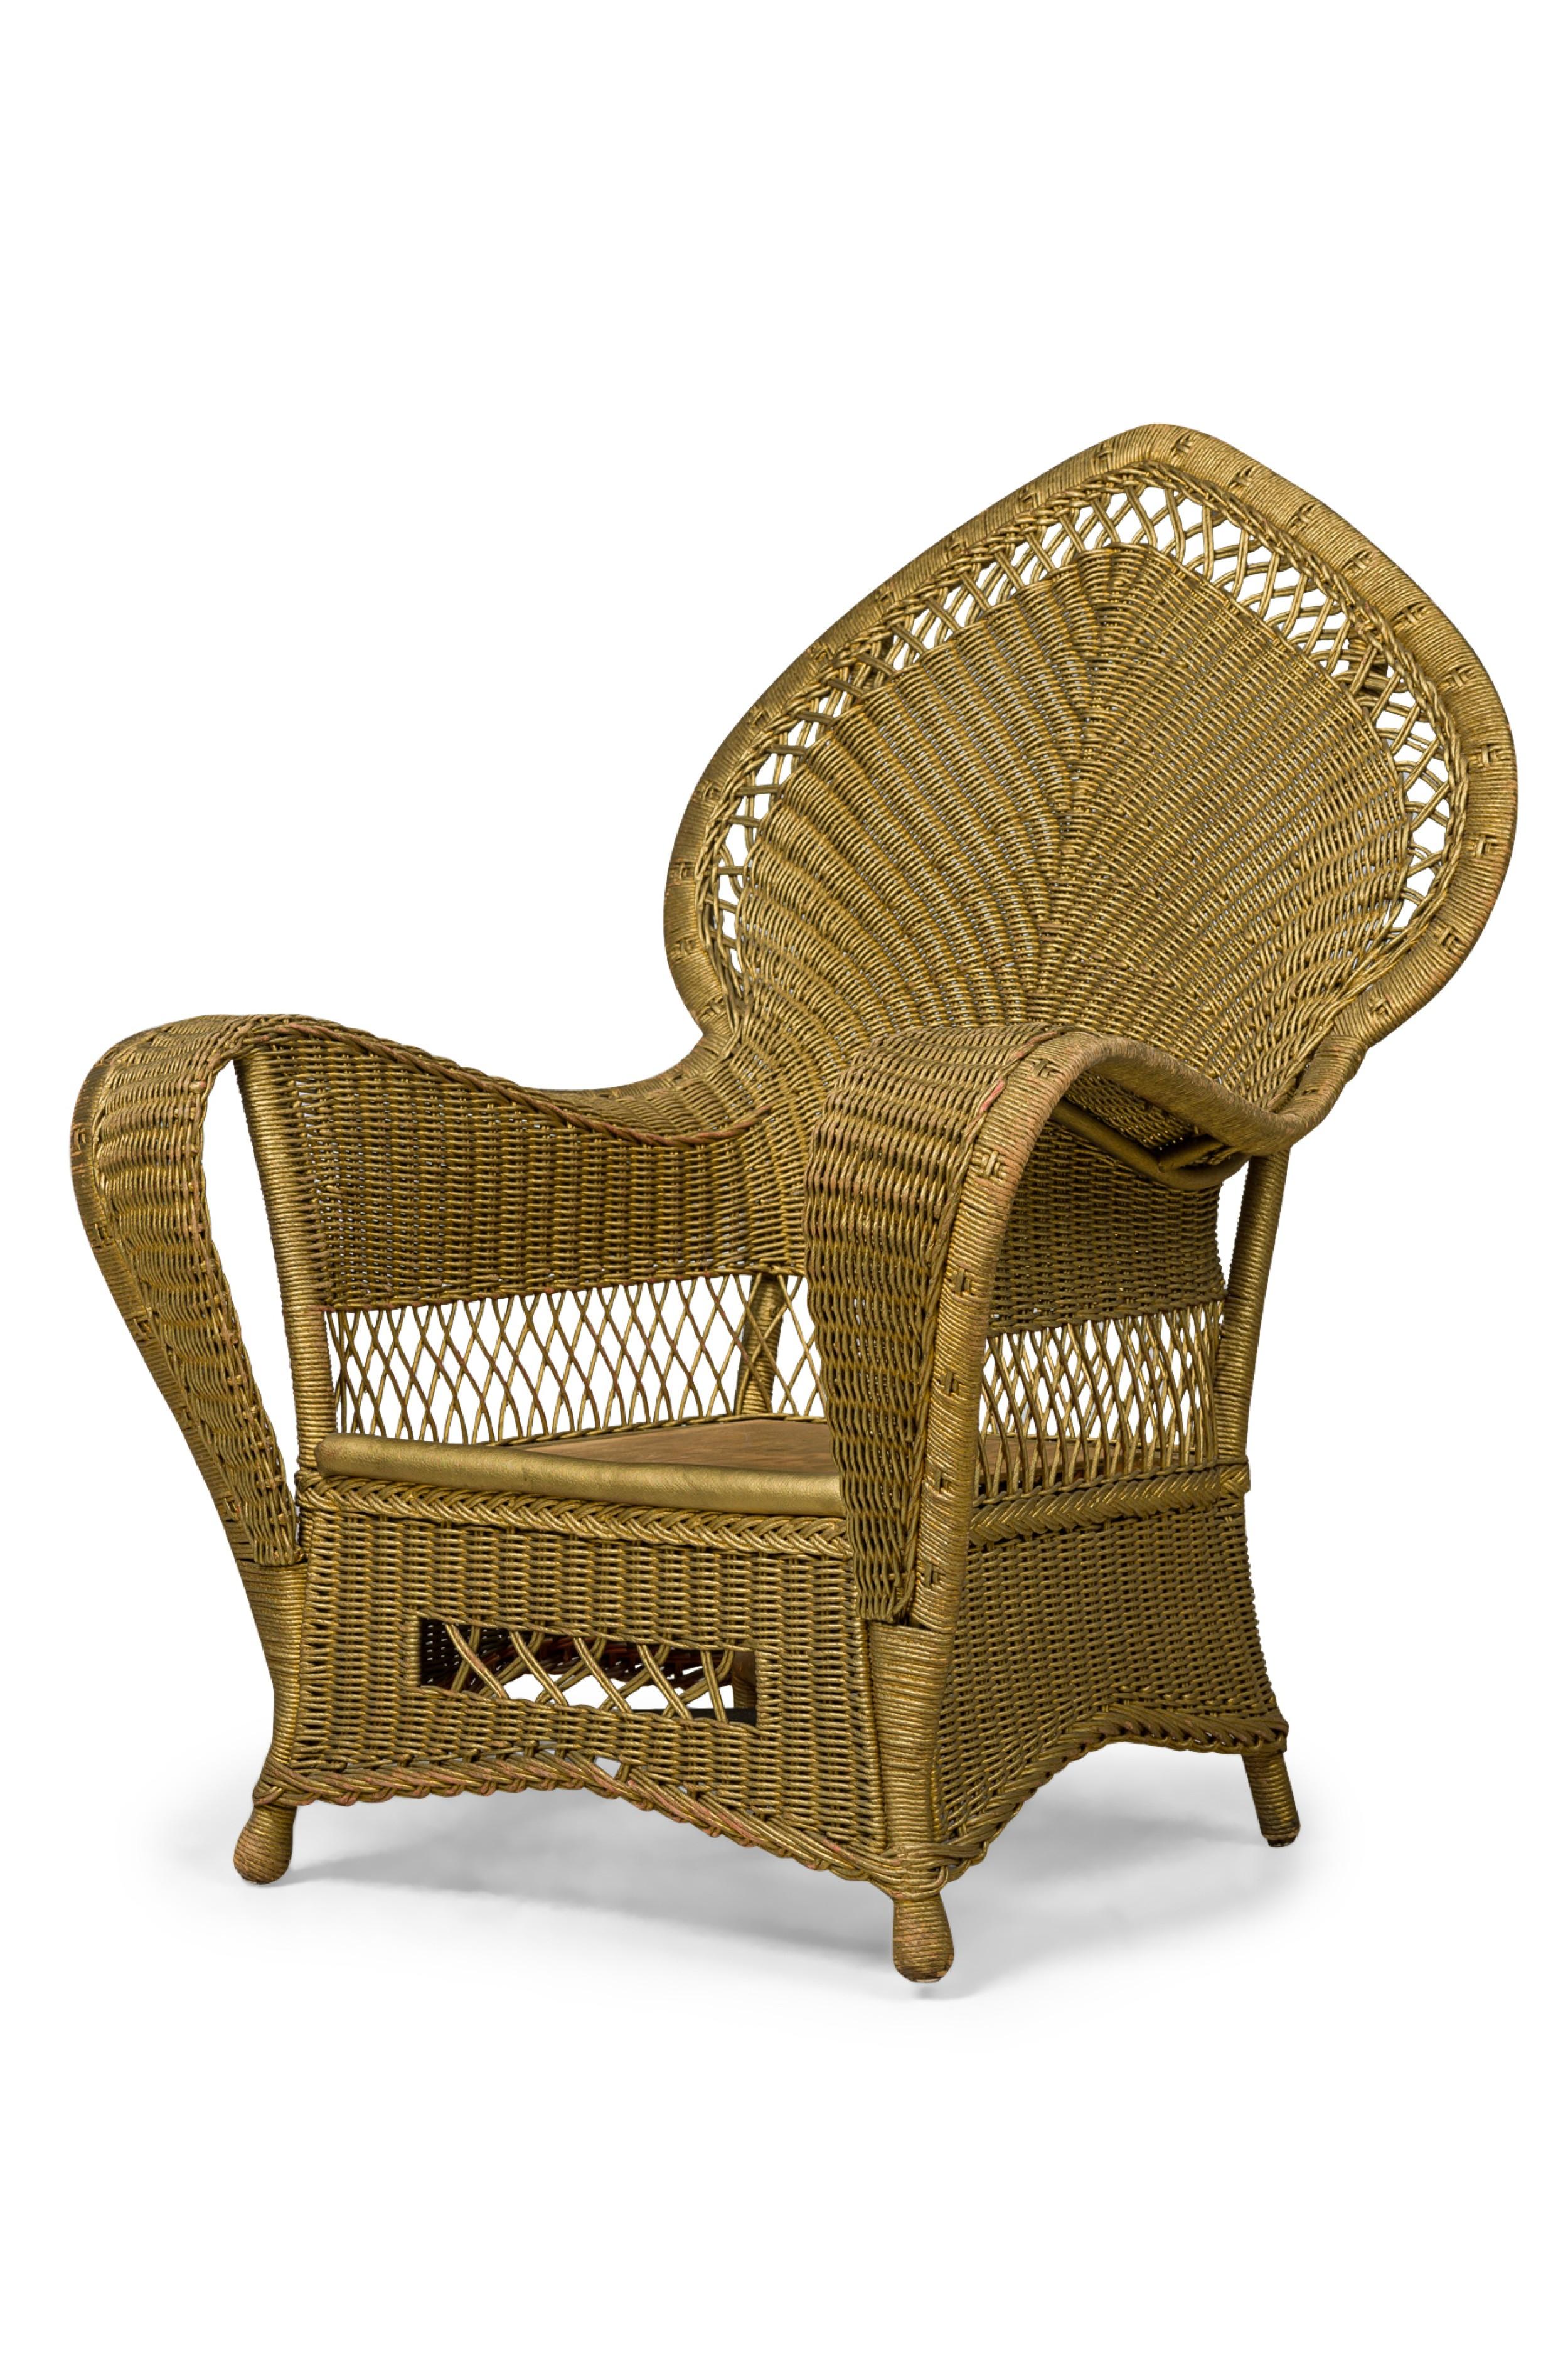 Pair of Similar Art Deco Gold Painted Paper Cord Wicker Armchairs For Sale 2